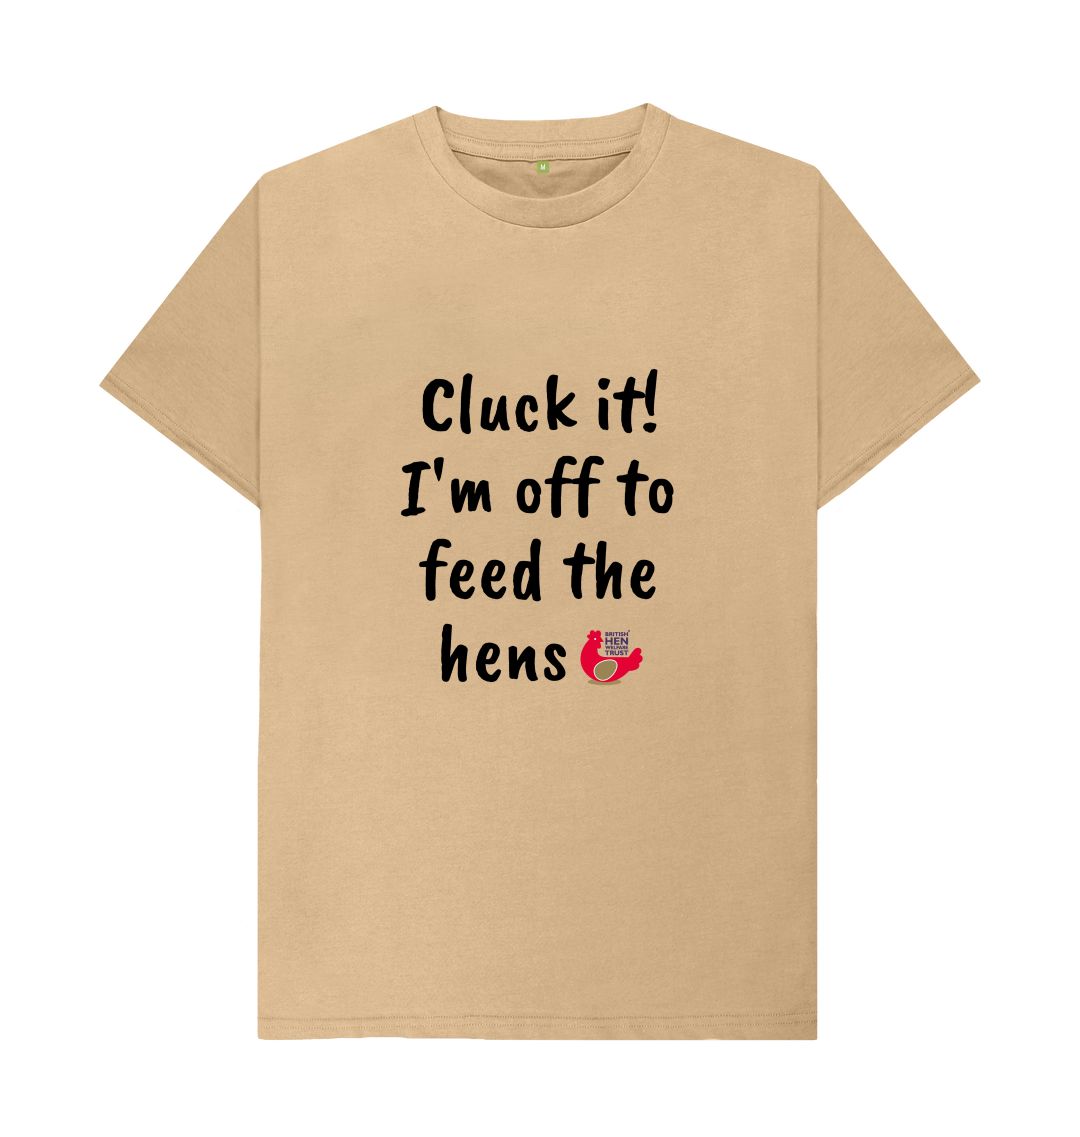 Sand Cluck it! I'm off to feed the hens Unisex T-shirt